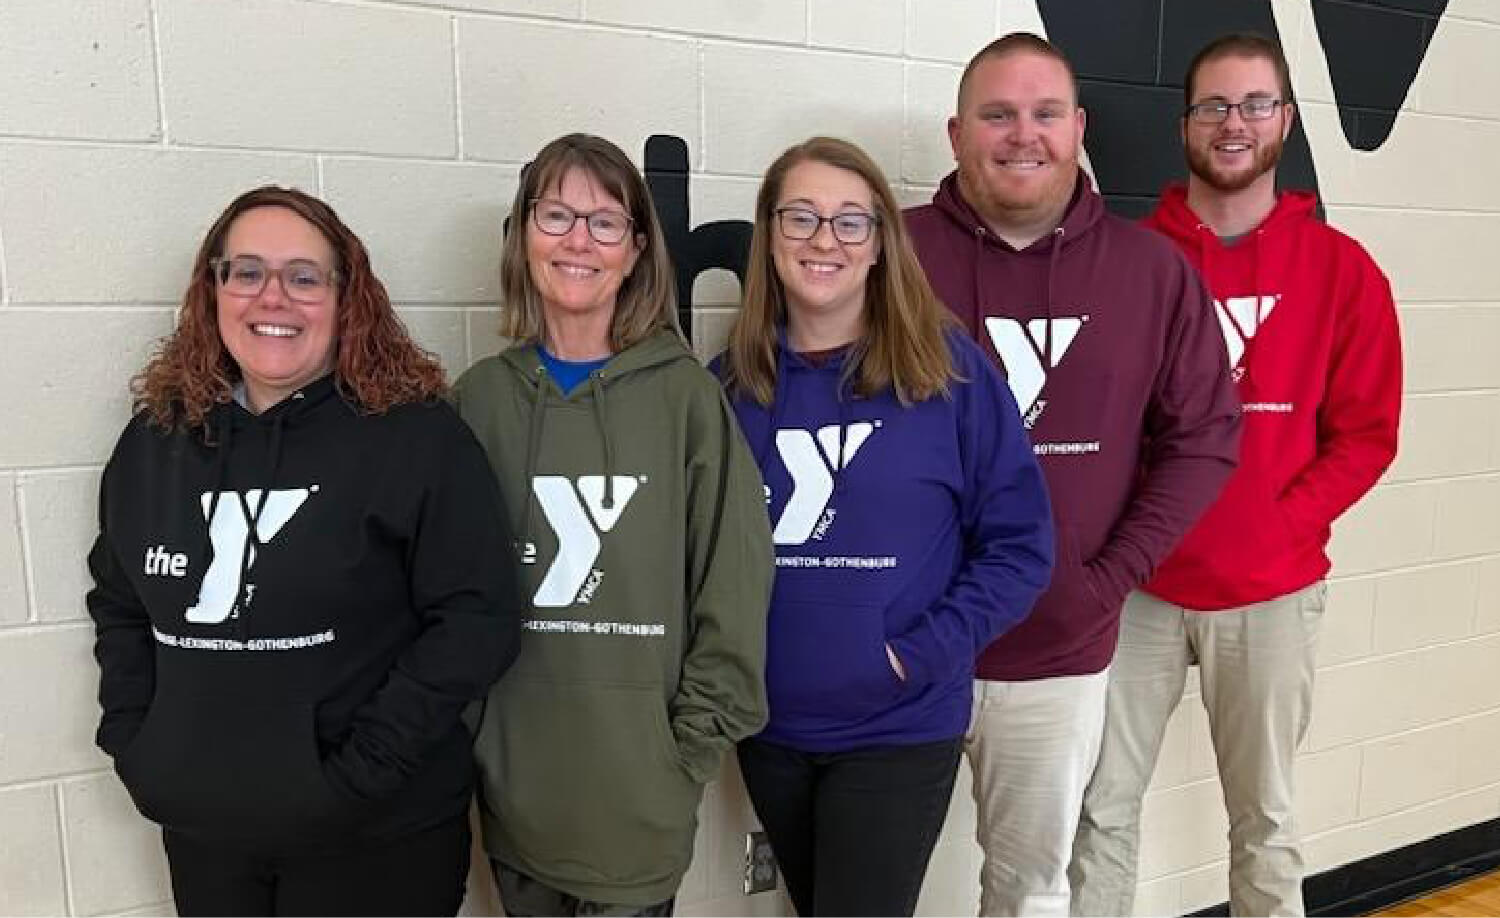 Our team of Directors - (L to R) Amy Adams – Associate Director, Terri Burch – Health & Wellness Director, Amber Holbrook – Youth & Family Director, Riley Gruntorad – CEO, YMCA of the Prairie, Daniel Holbrook – Sports Director.